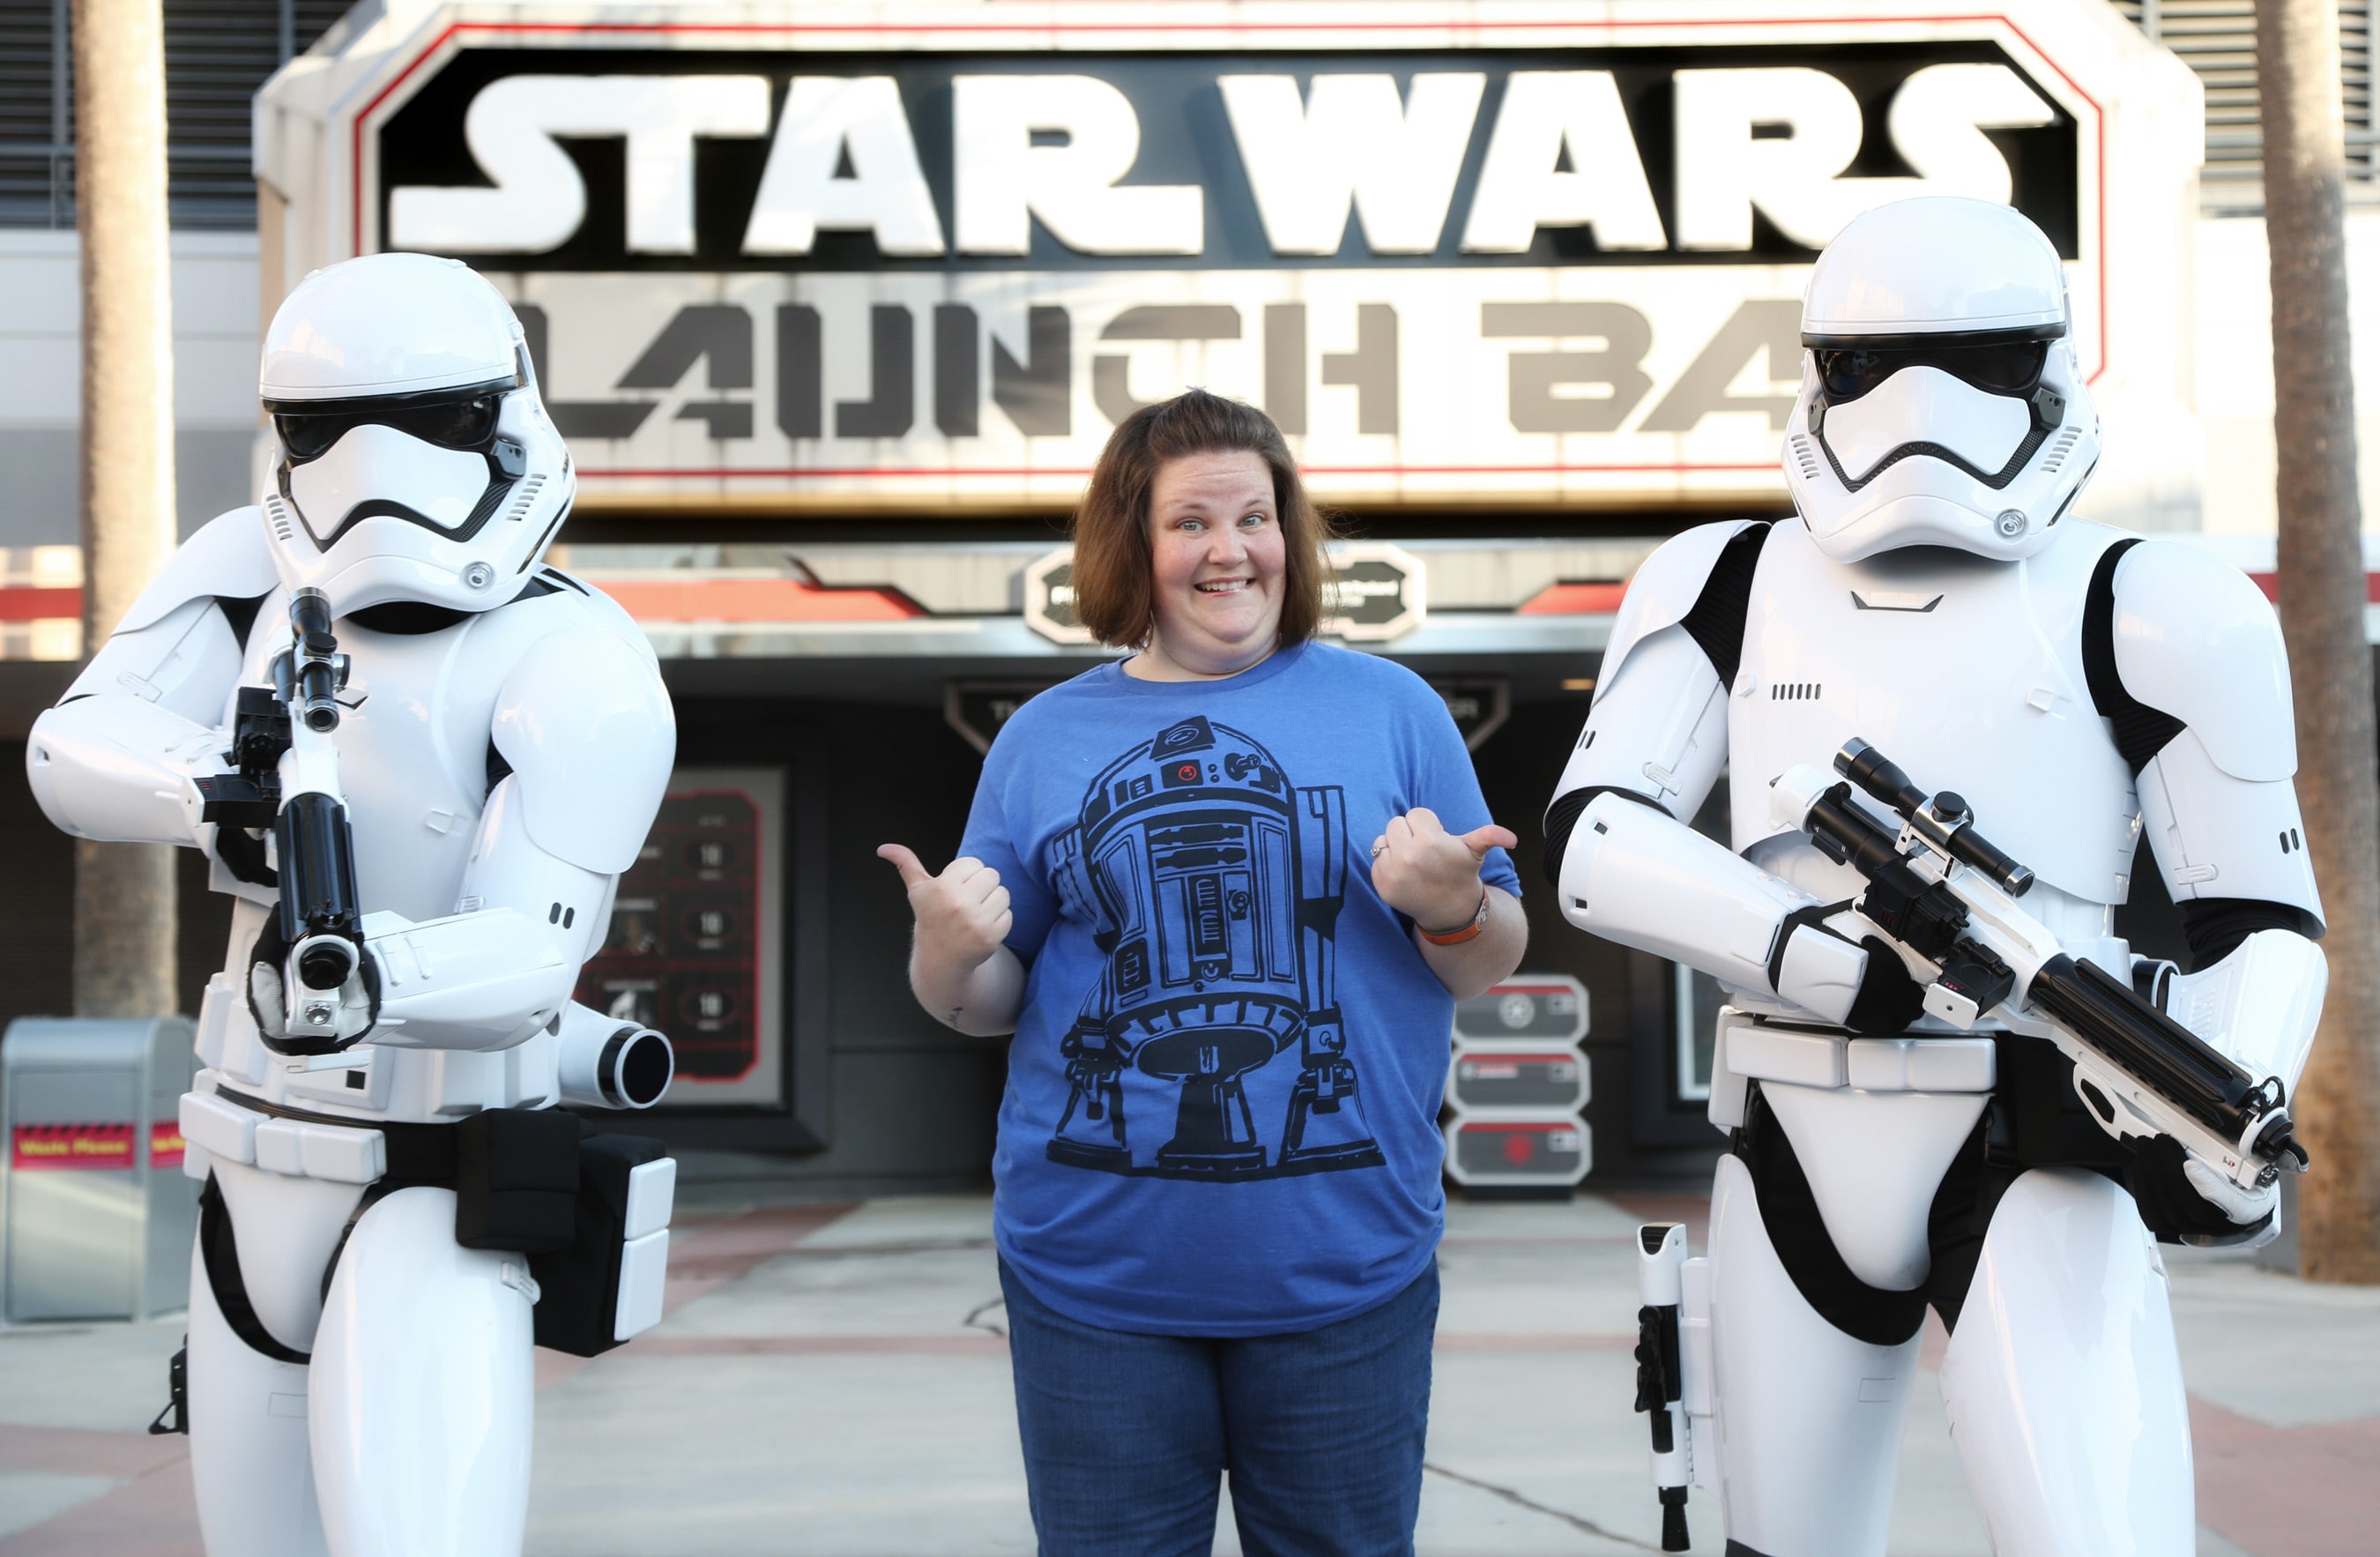 Chewbacca Mom meets Stormtroopers